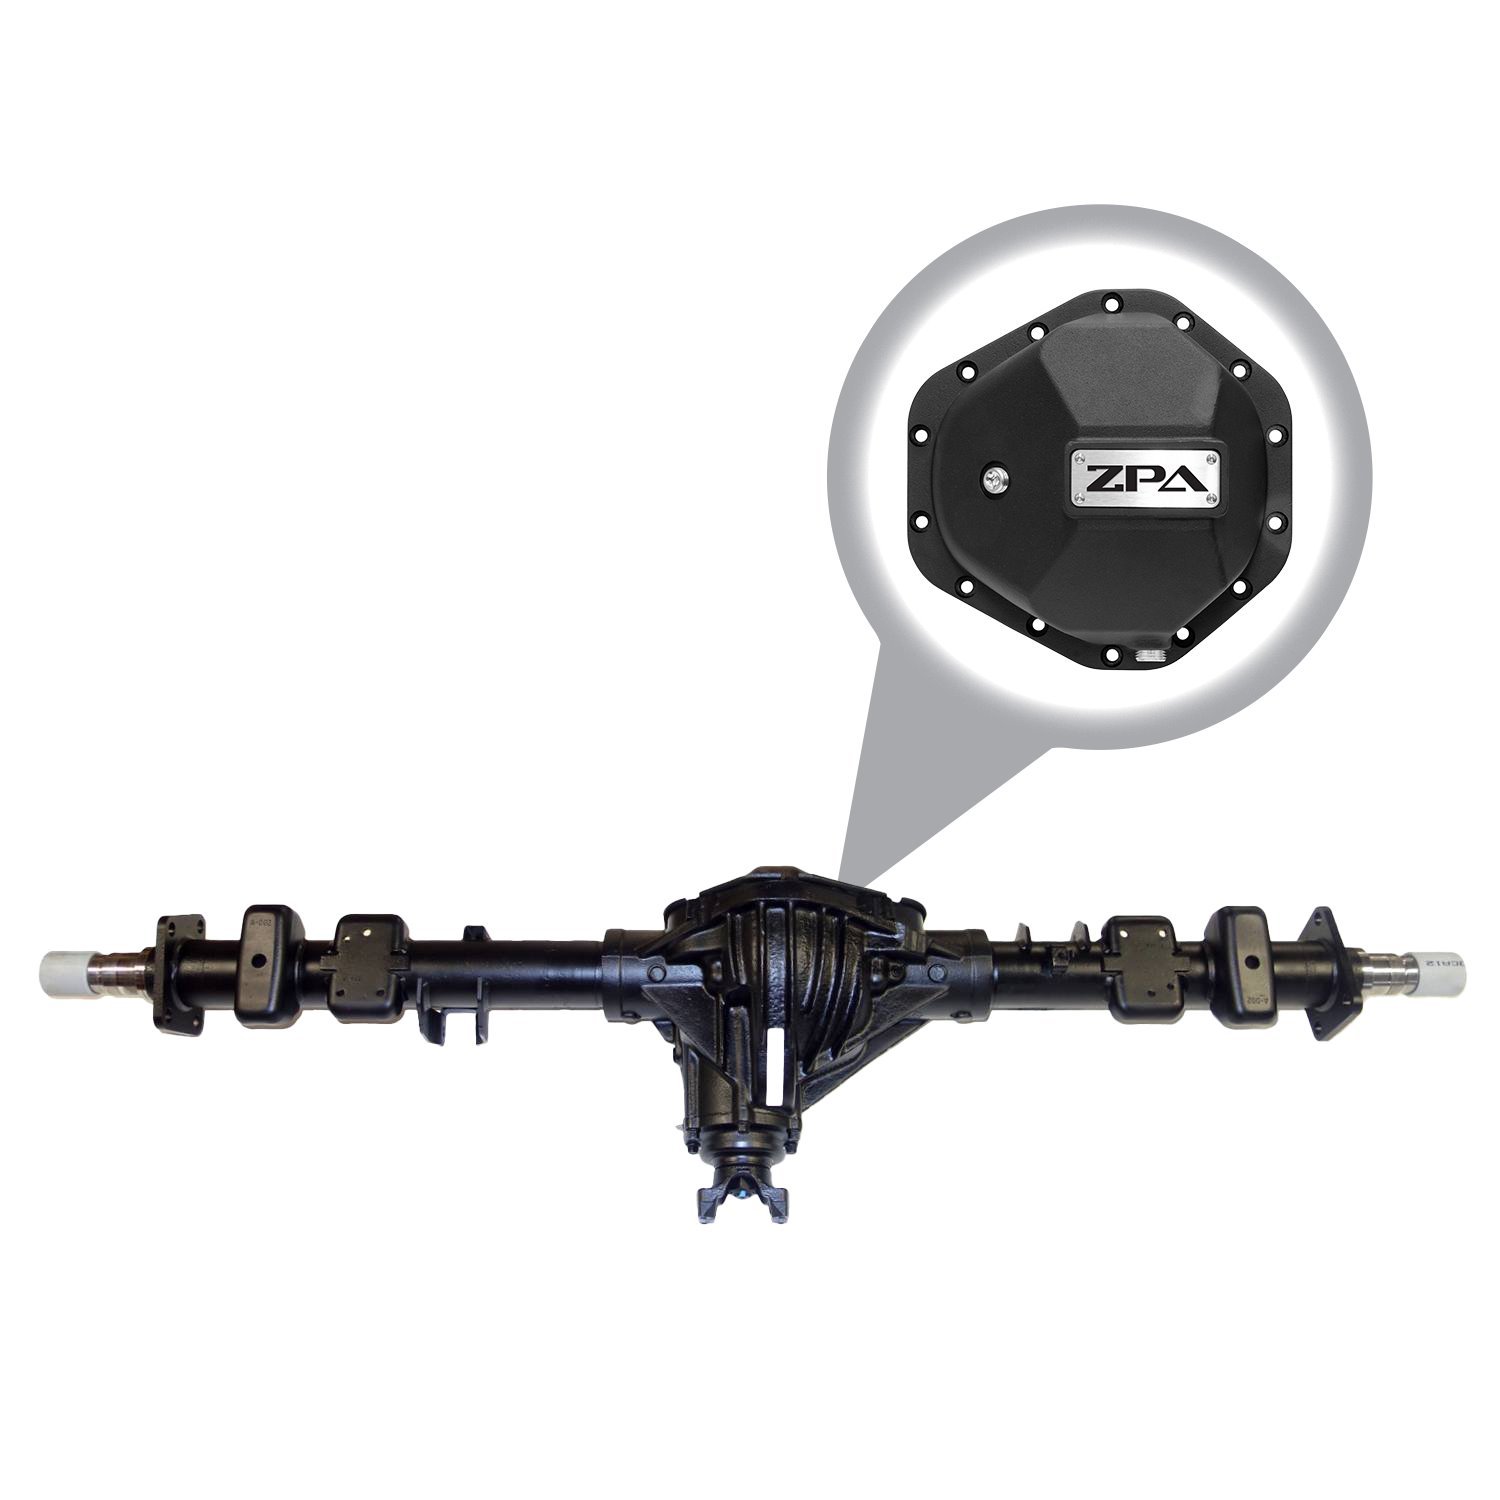 RAA435-1957X2-L Rear Axle Assembly, GM 14 bolt Full Float, '99-'07 GM 2500 Pickup ('07 Classic), 4.88 Ratio, Grizzly